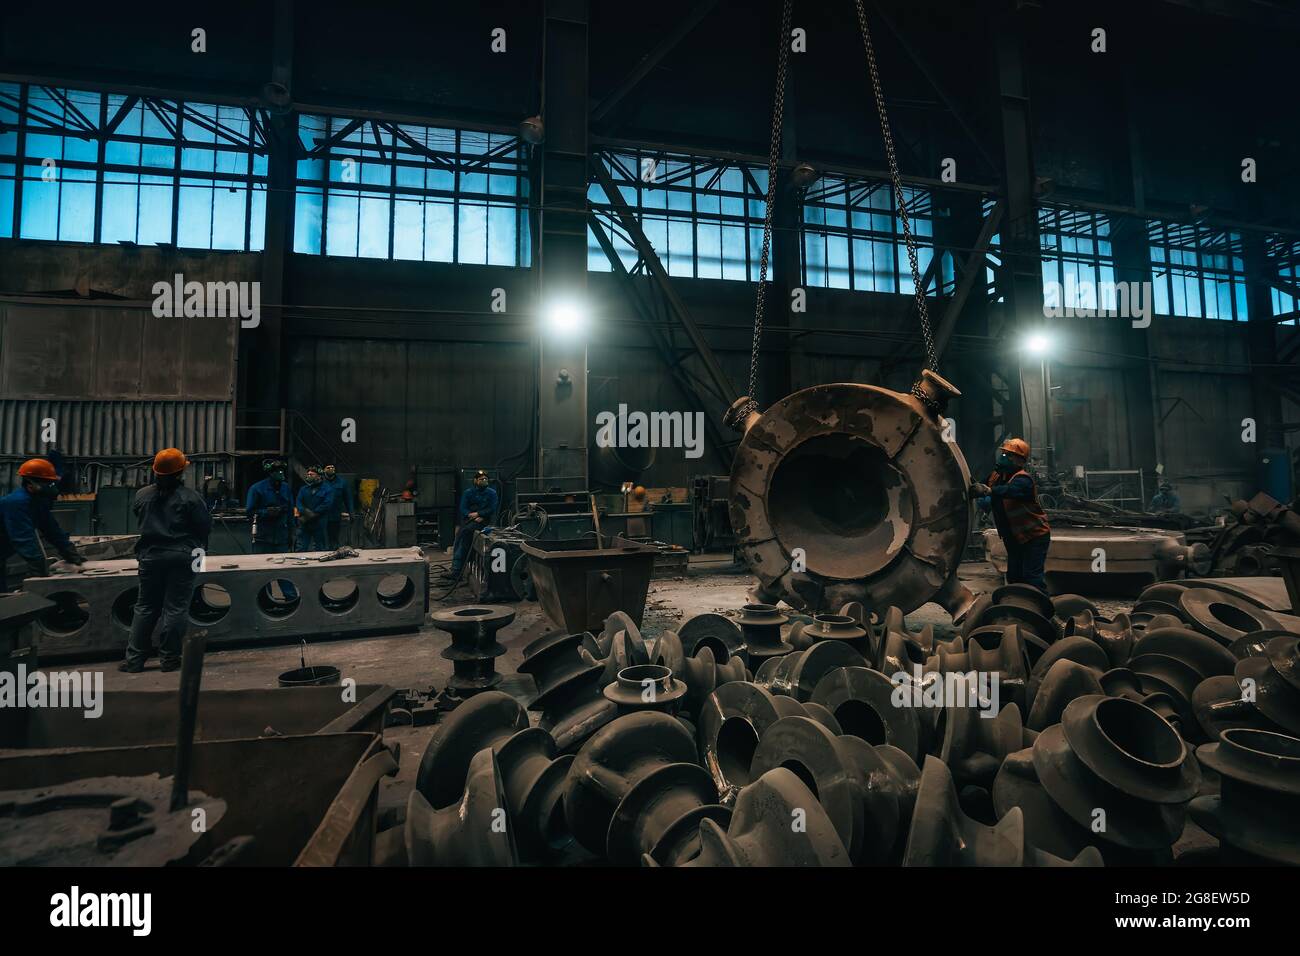 Metallurgical production, steelmaking and processing iron products. Manufacturing premises and workshop in foundry heavy metallurgy industry. Stock Photo